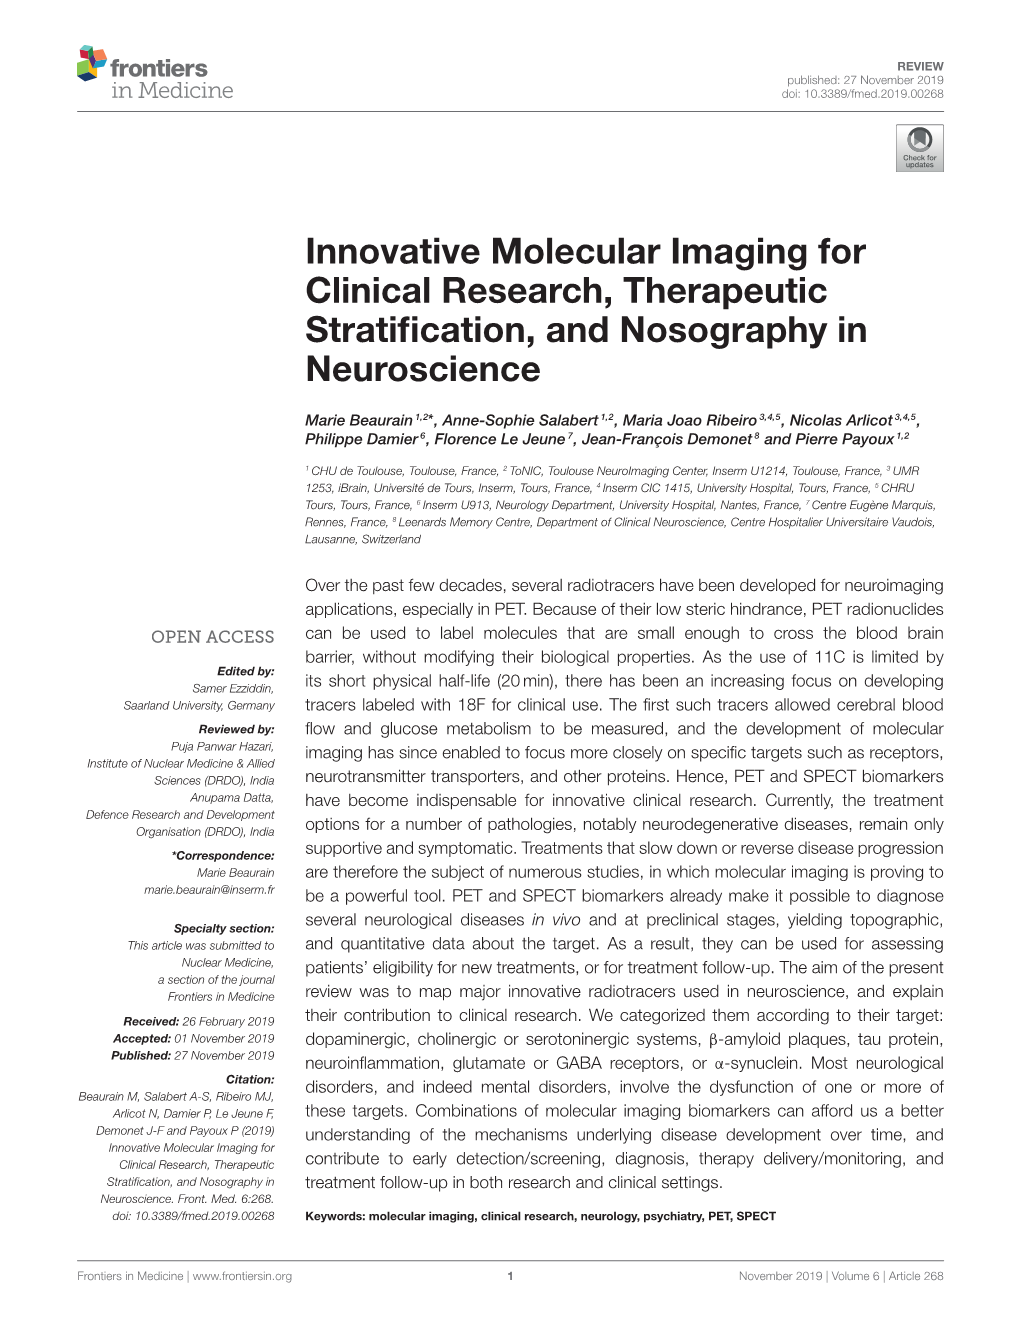 Innovative Molecular Imaging for Clinical Research, Therapeutic Stratiﬁcation, and Nosography in Neuroscience